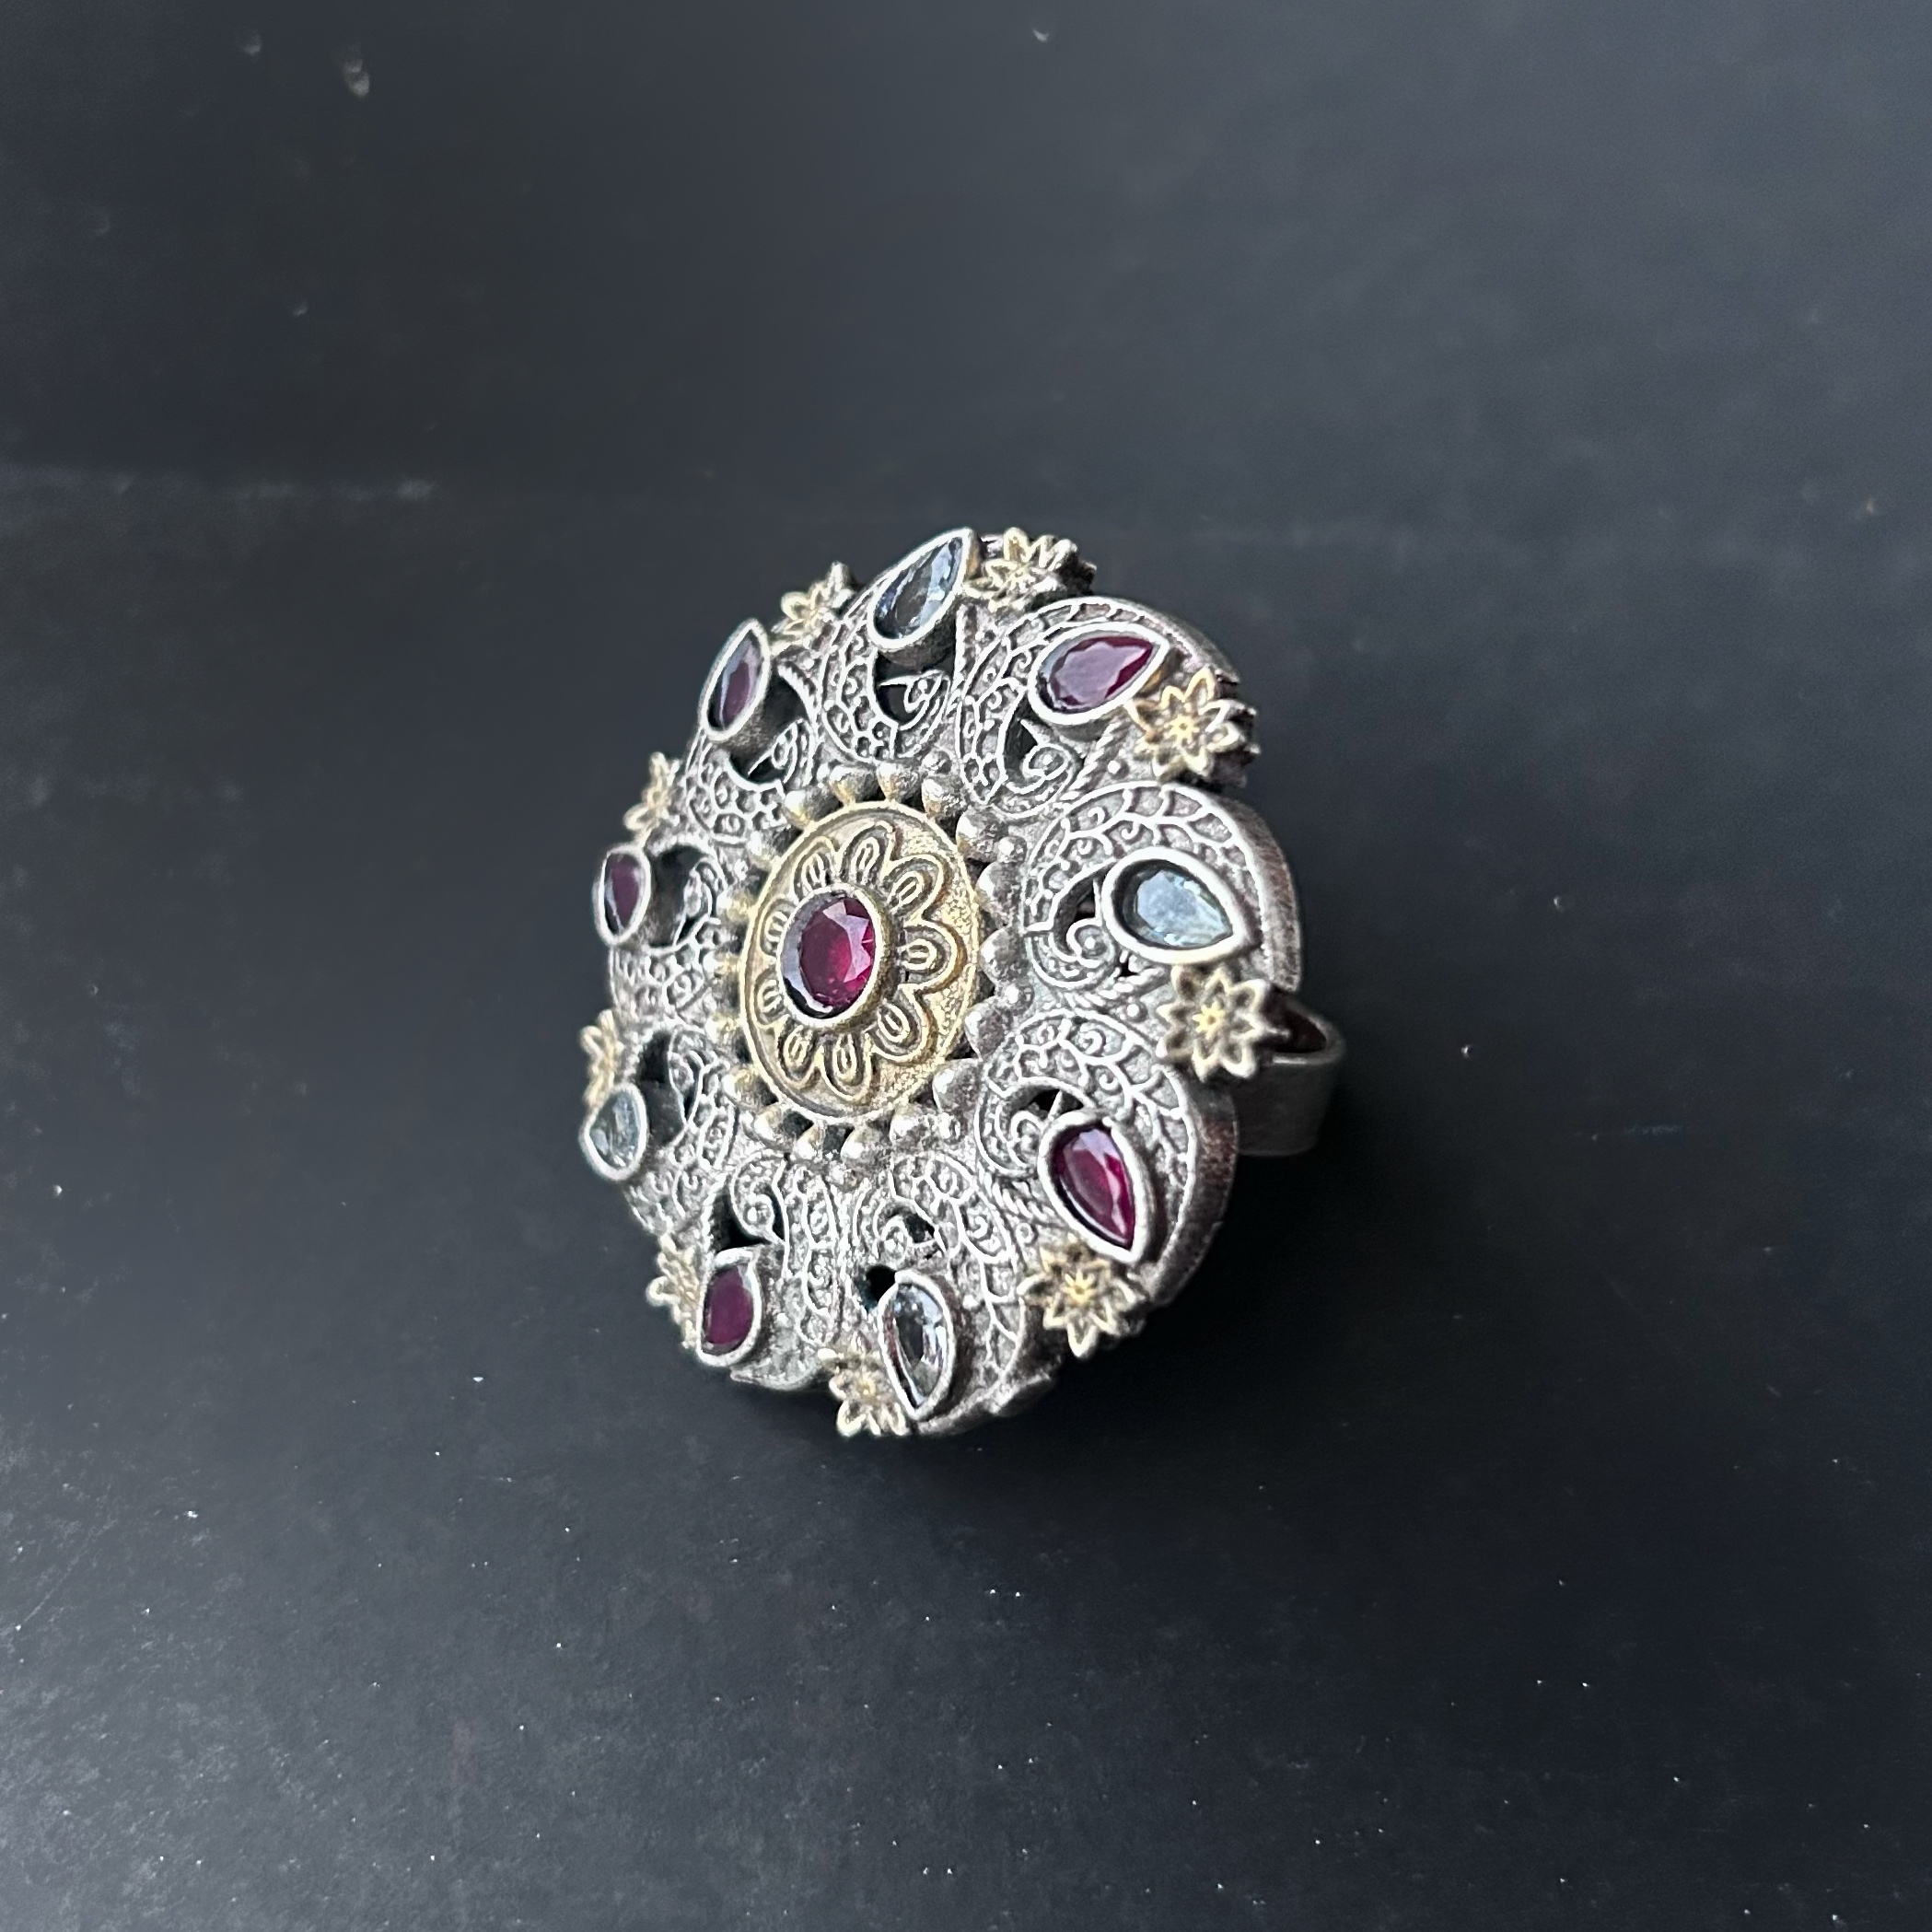 925 Sterling Silver - Vintage Laced Art Deco Cocktail Ring Sz 6.5 - RG3004  on eBid United States | 219409294